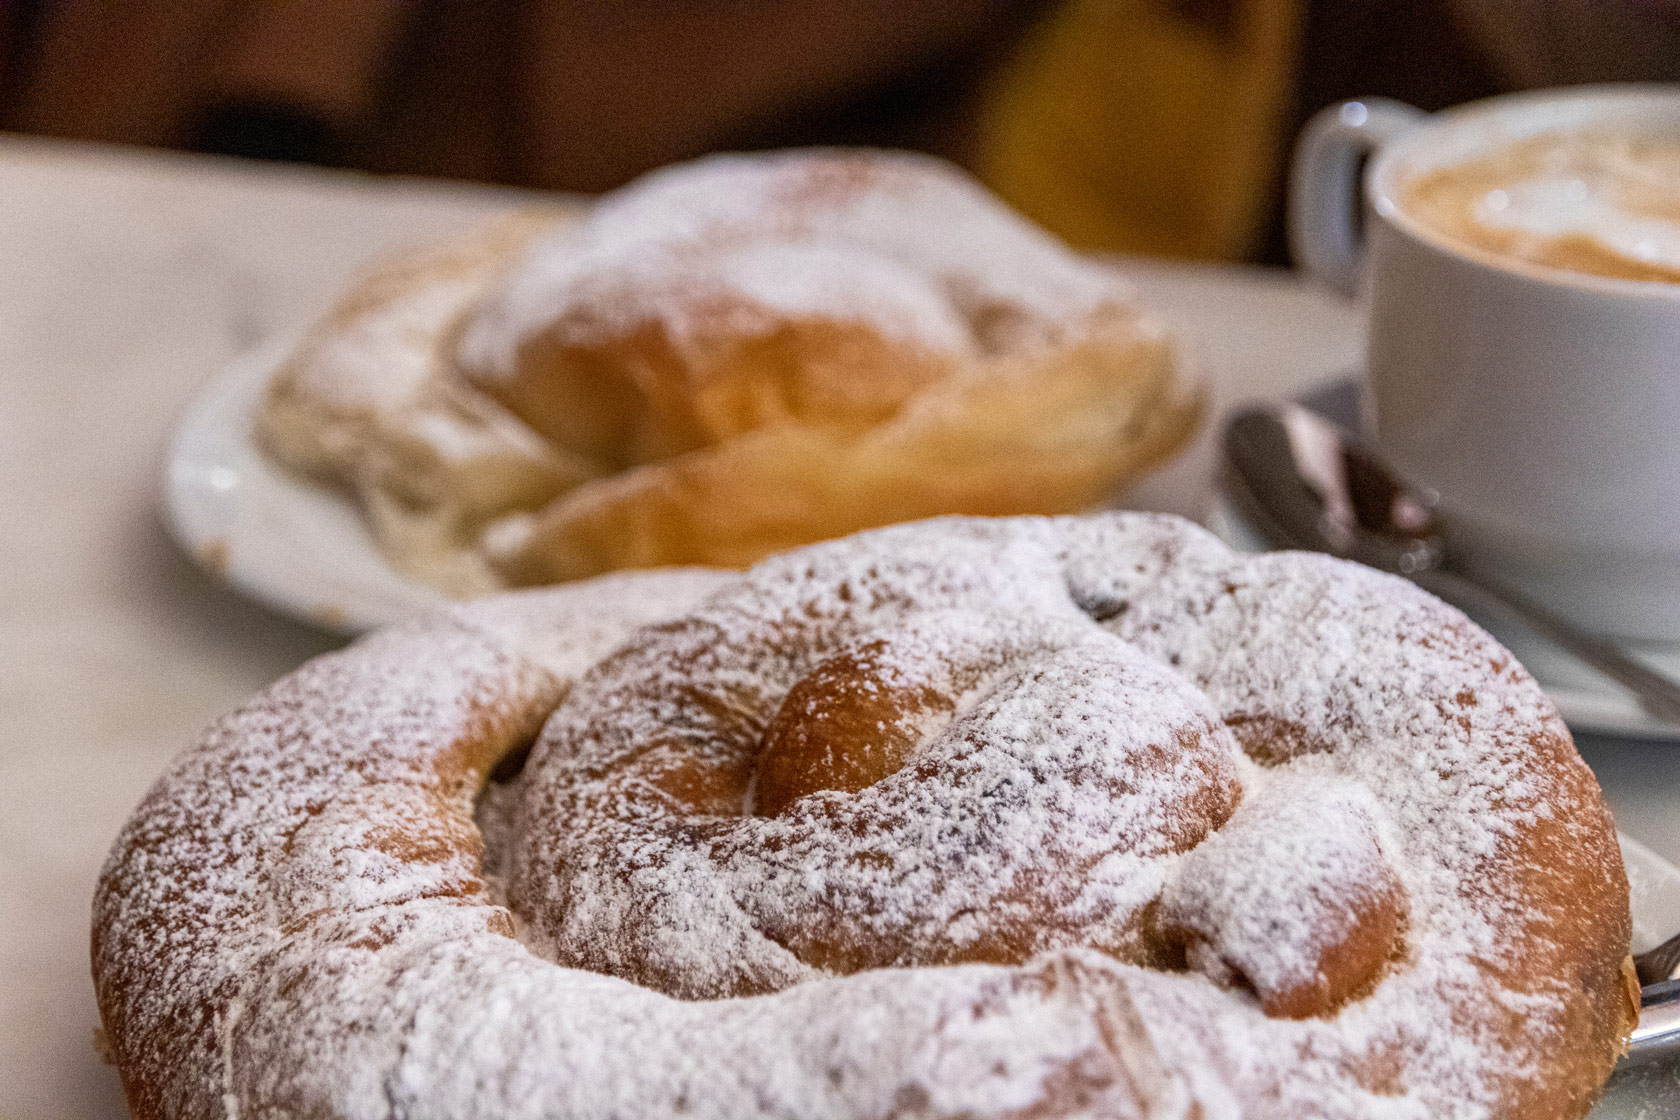 Palma de Mallorca, Spain. Two ensaimada, typical and traditional pastry product from the Balearic Islands